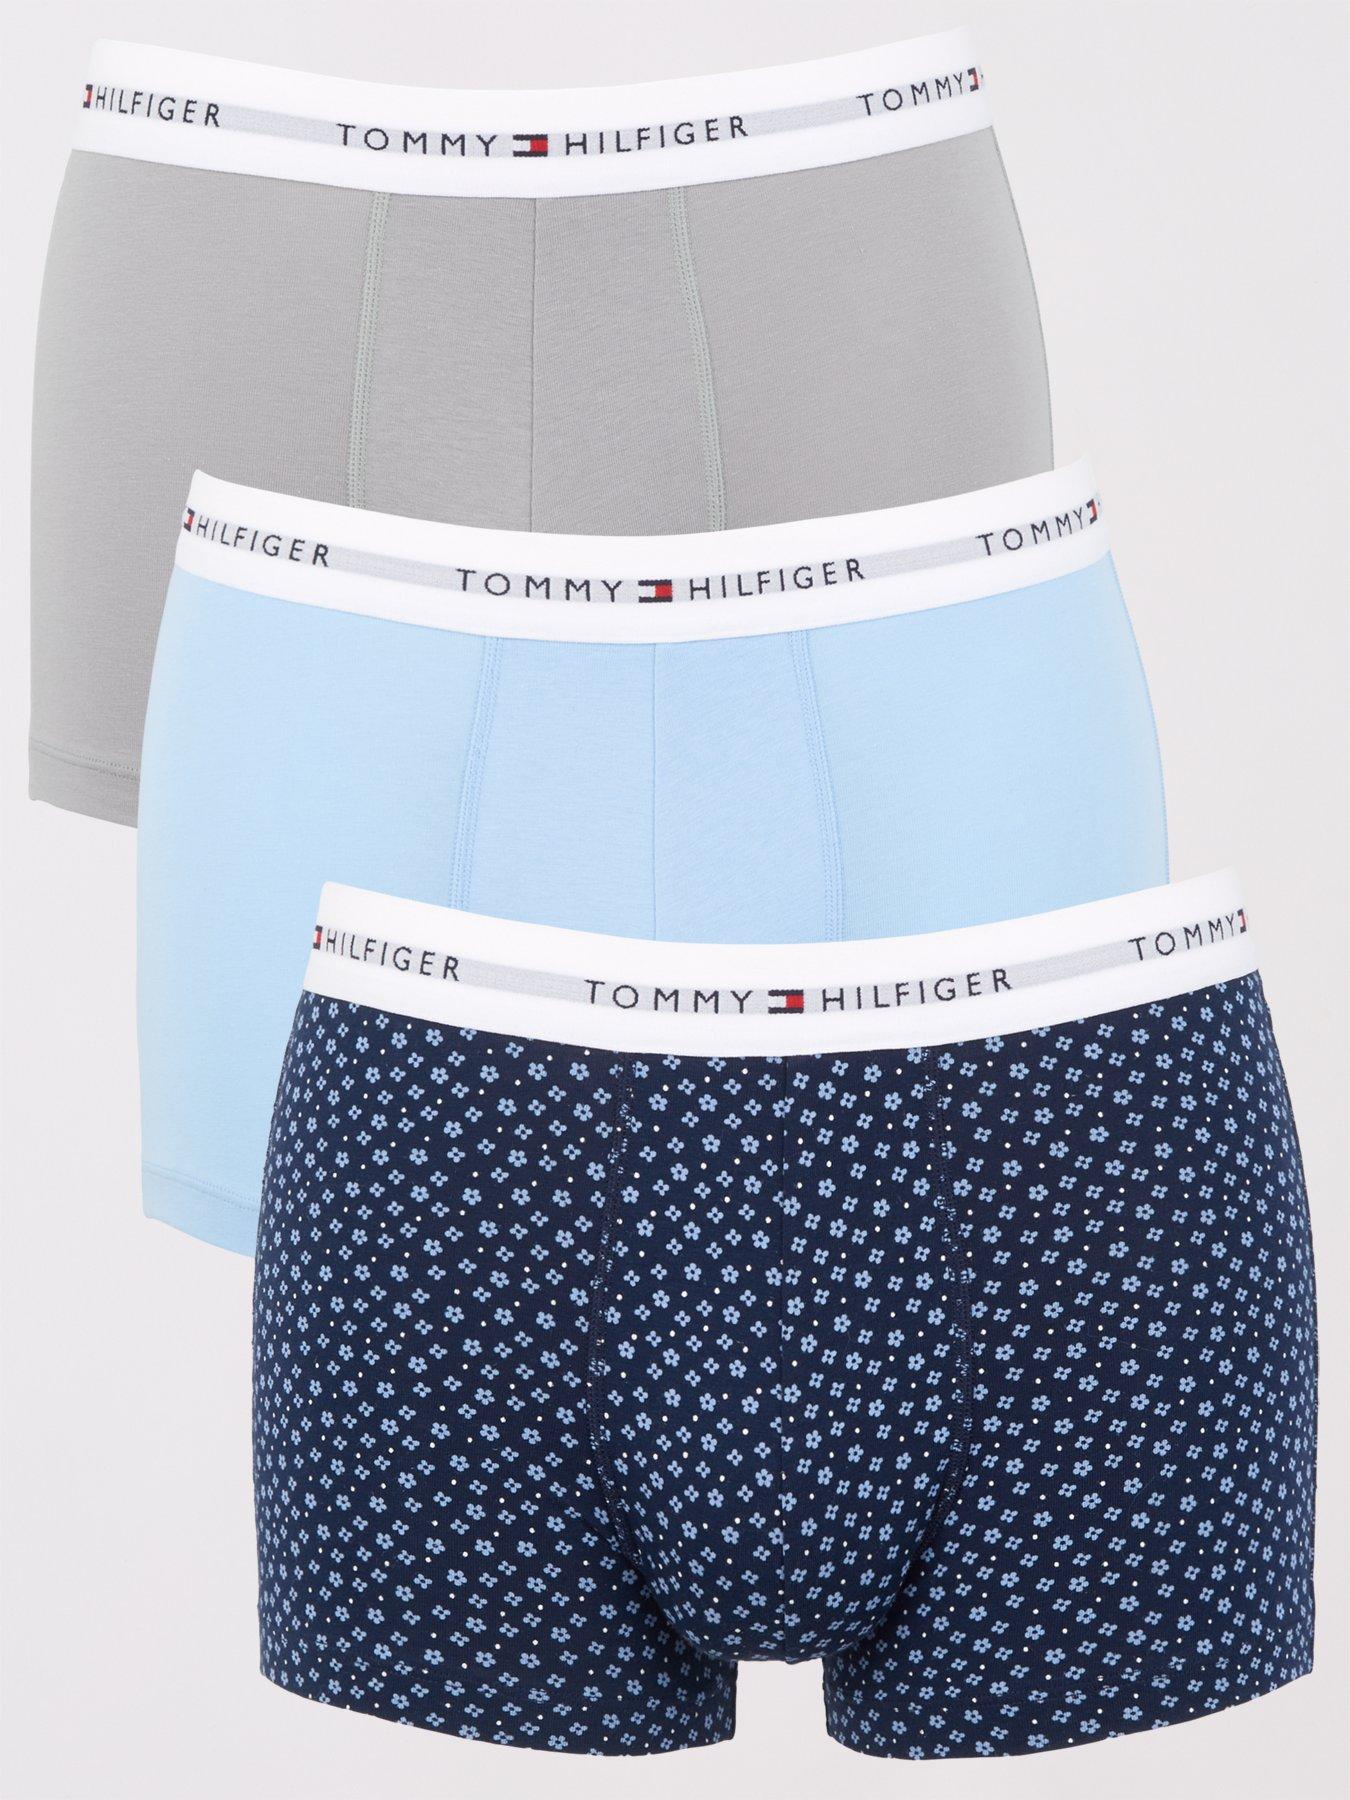 Tommy Hilfiger 3 Pack Trunks Grey/Blue | Very